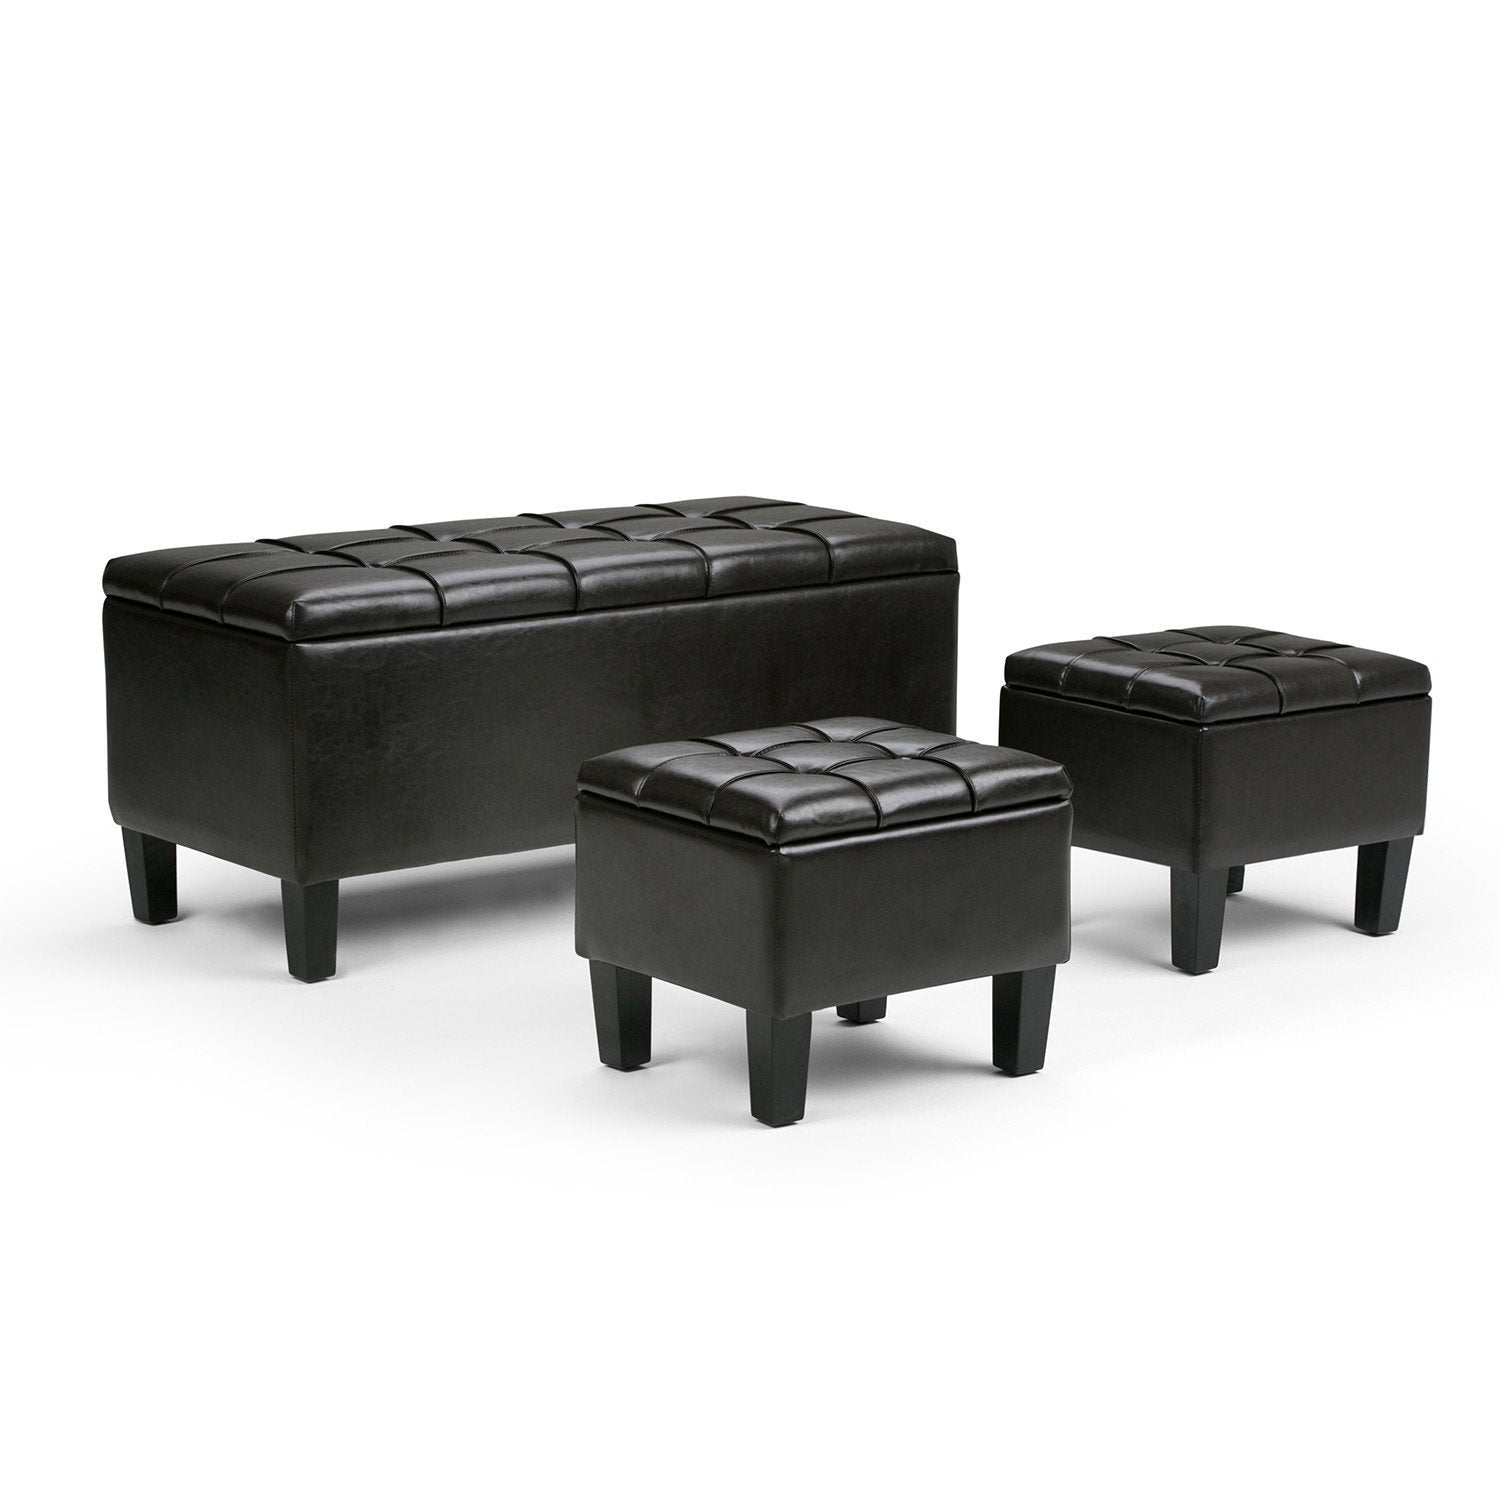 Tanners Brown Vegan Leather | Dover 3 piece Vegan Leather Storage Ottoman